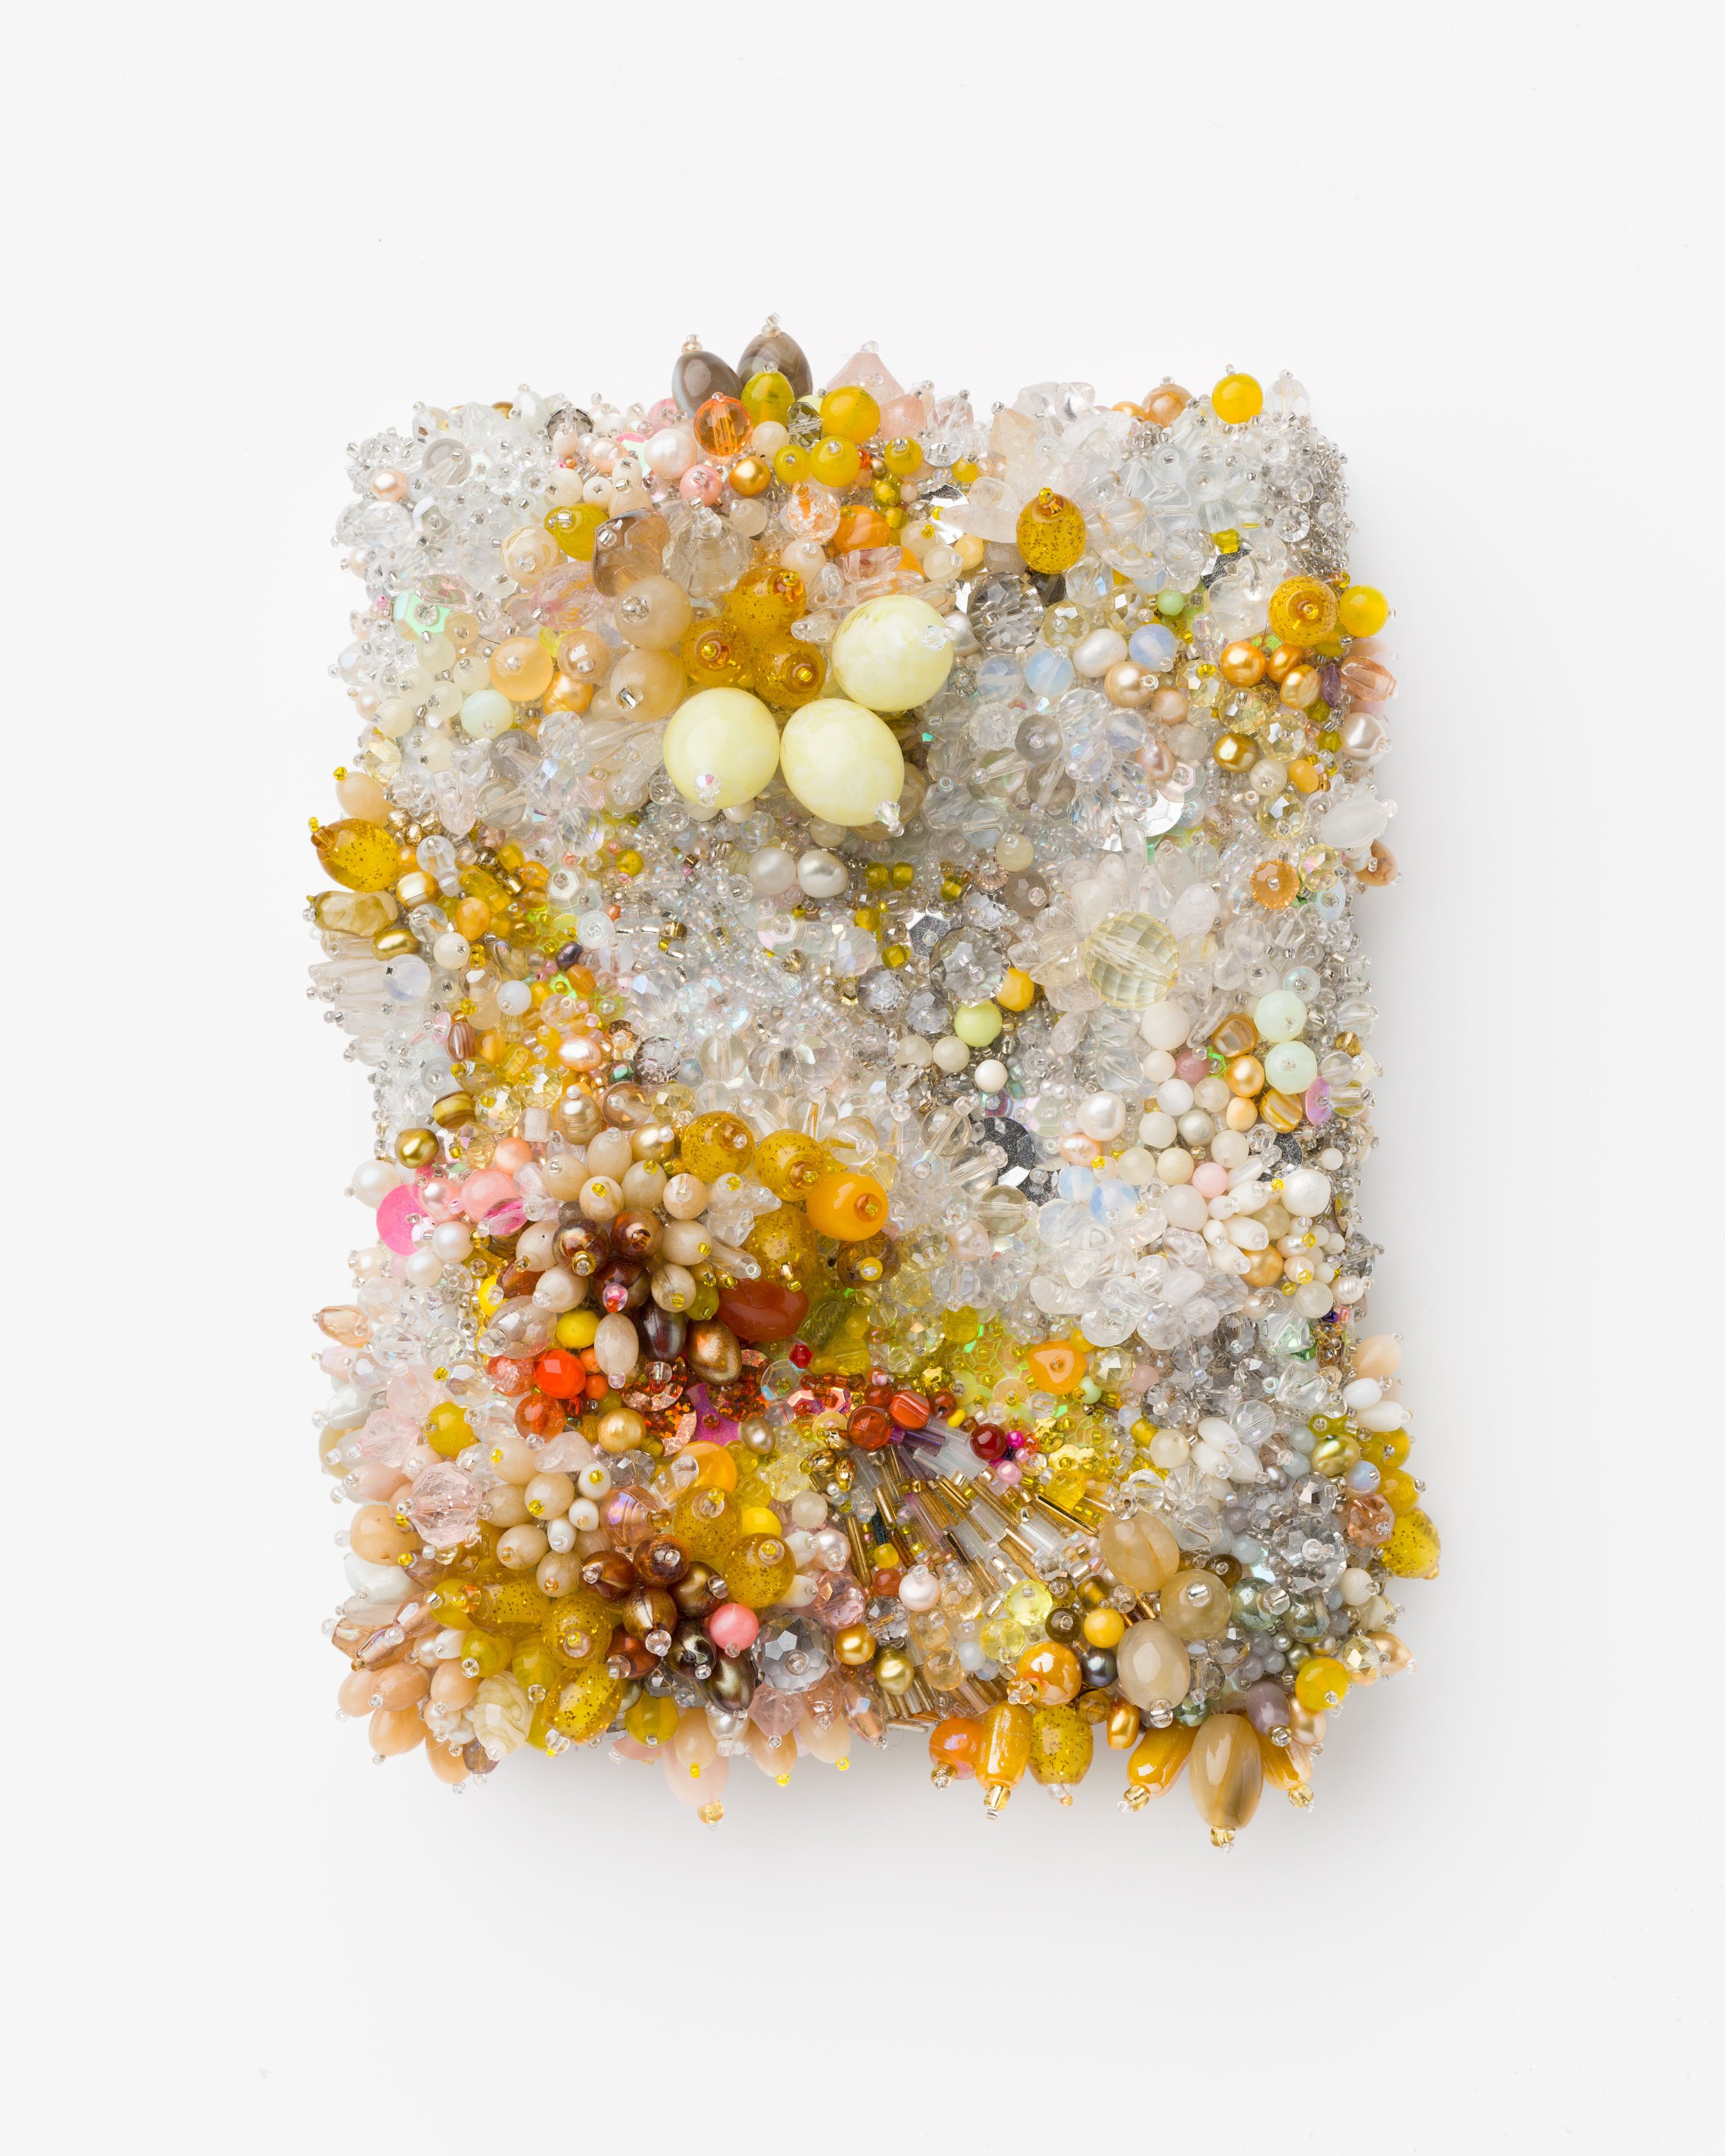   A moment eternal, no. 3 (golden hour, yellow, beige, grey and iridescent)    2020-2021   Beading of vintage and antique glass, plastic, pearls, swarovski crystal, quartz, rose quartz, coral,, agate, moonstone, mother-of-pearl, shell, carnelian, bra